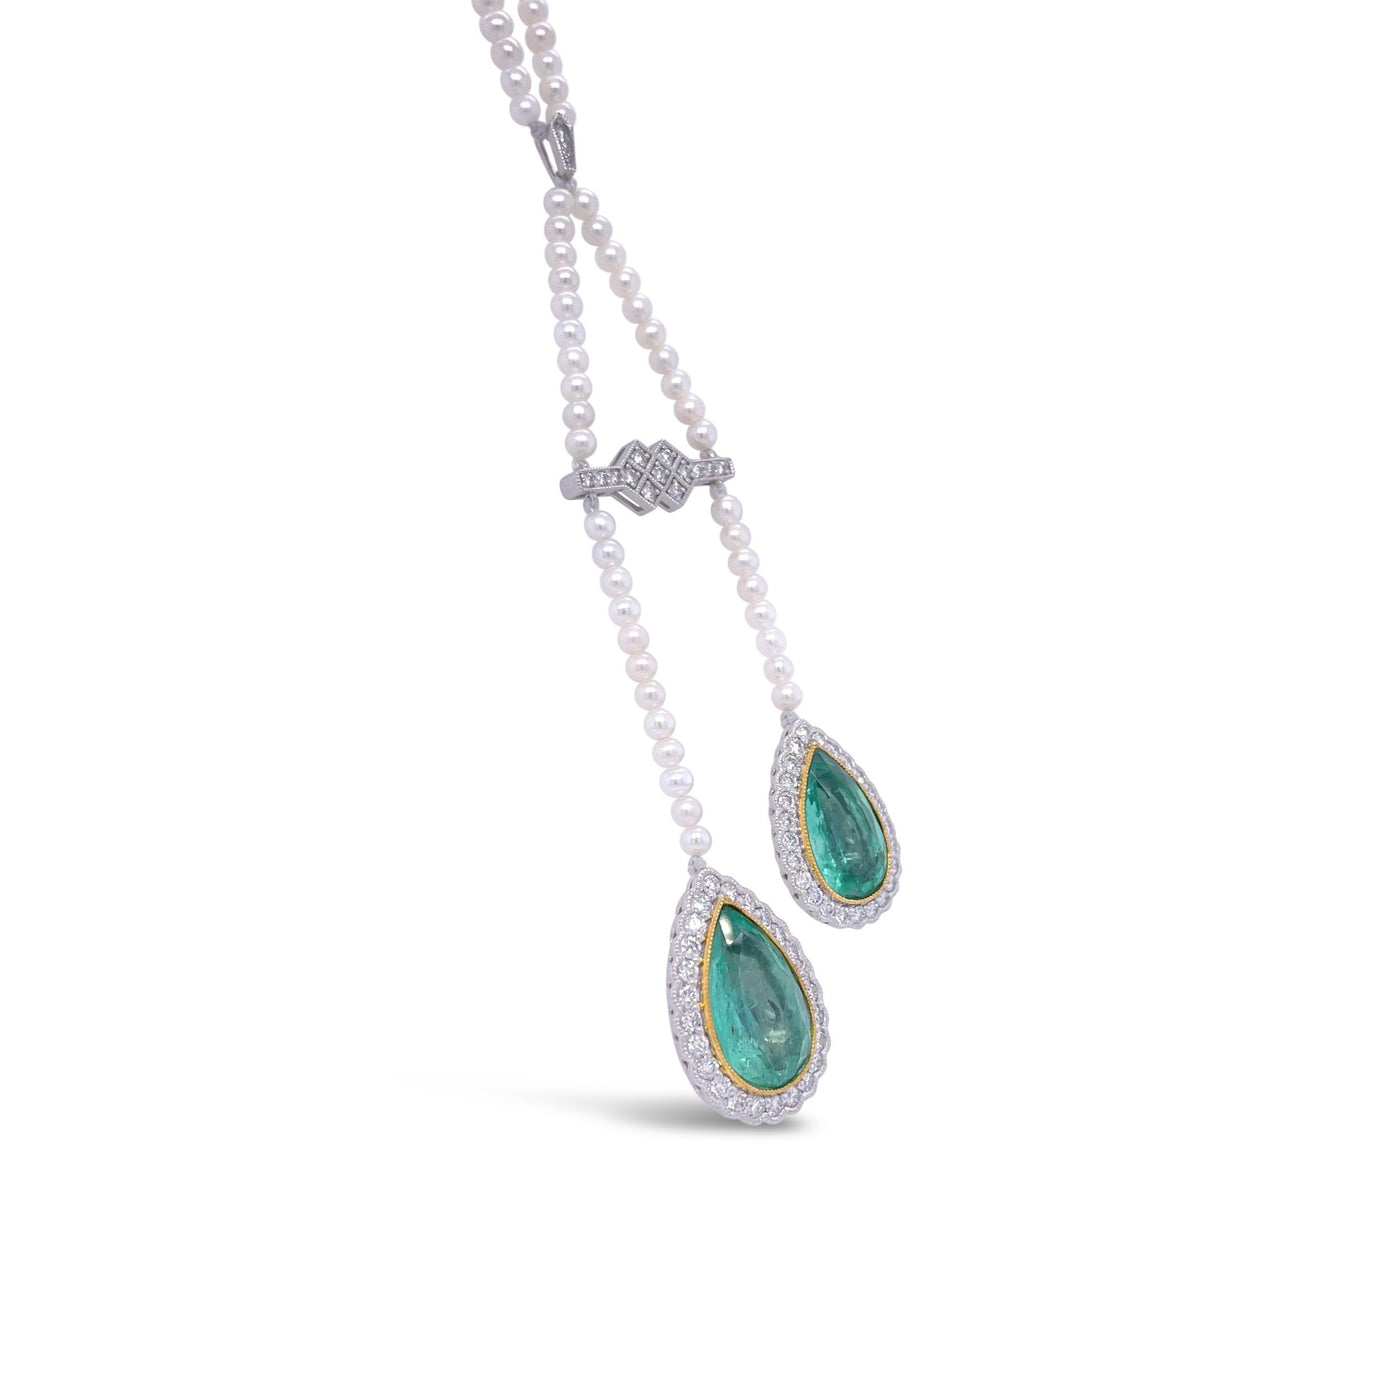 14CT white gold and platinum, Emerald, pearl and diamond necklace